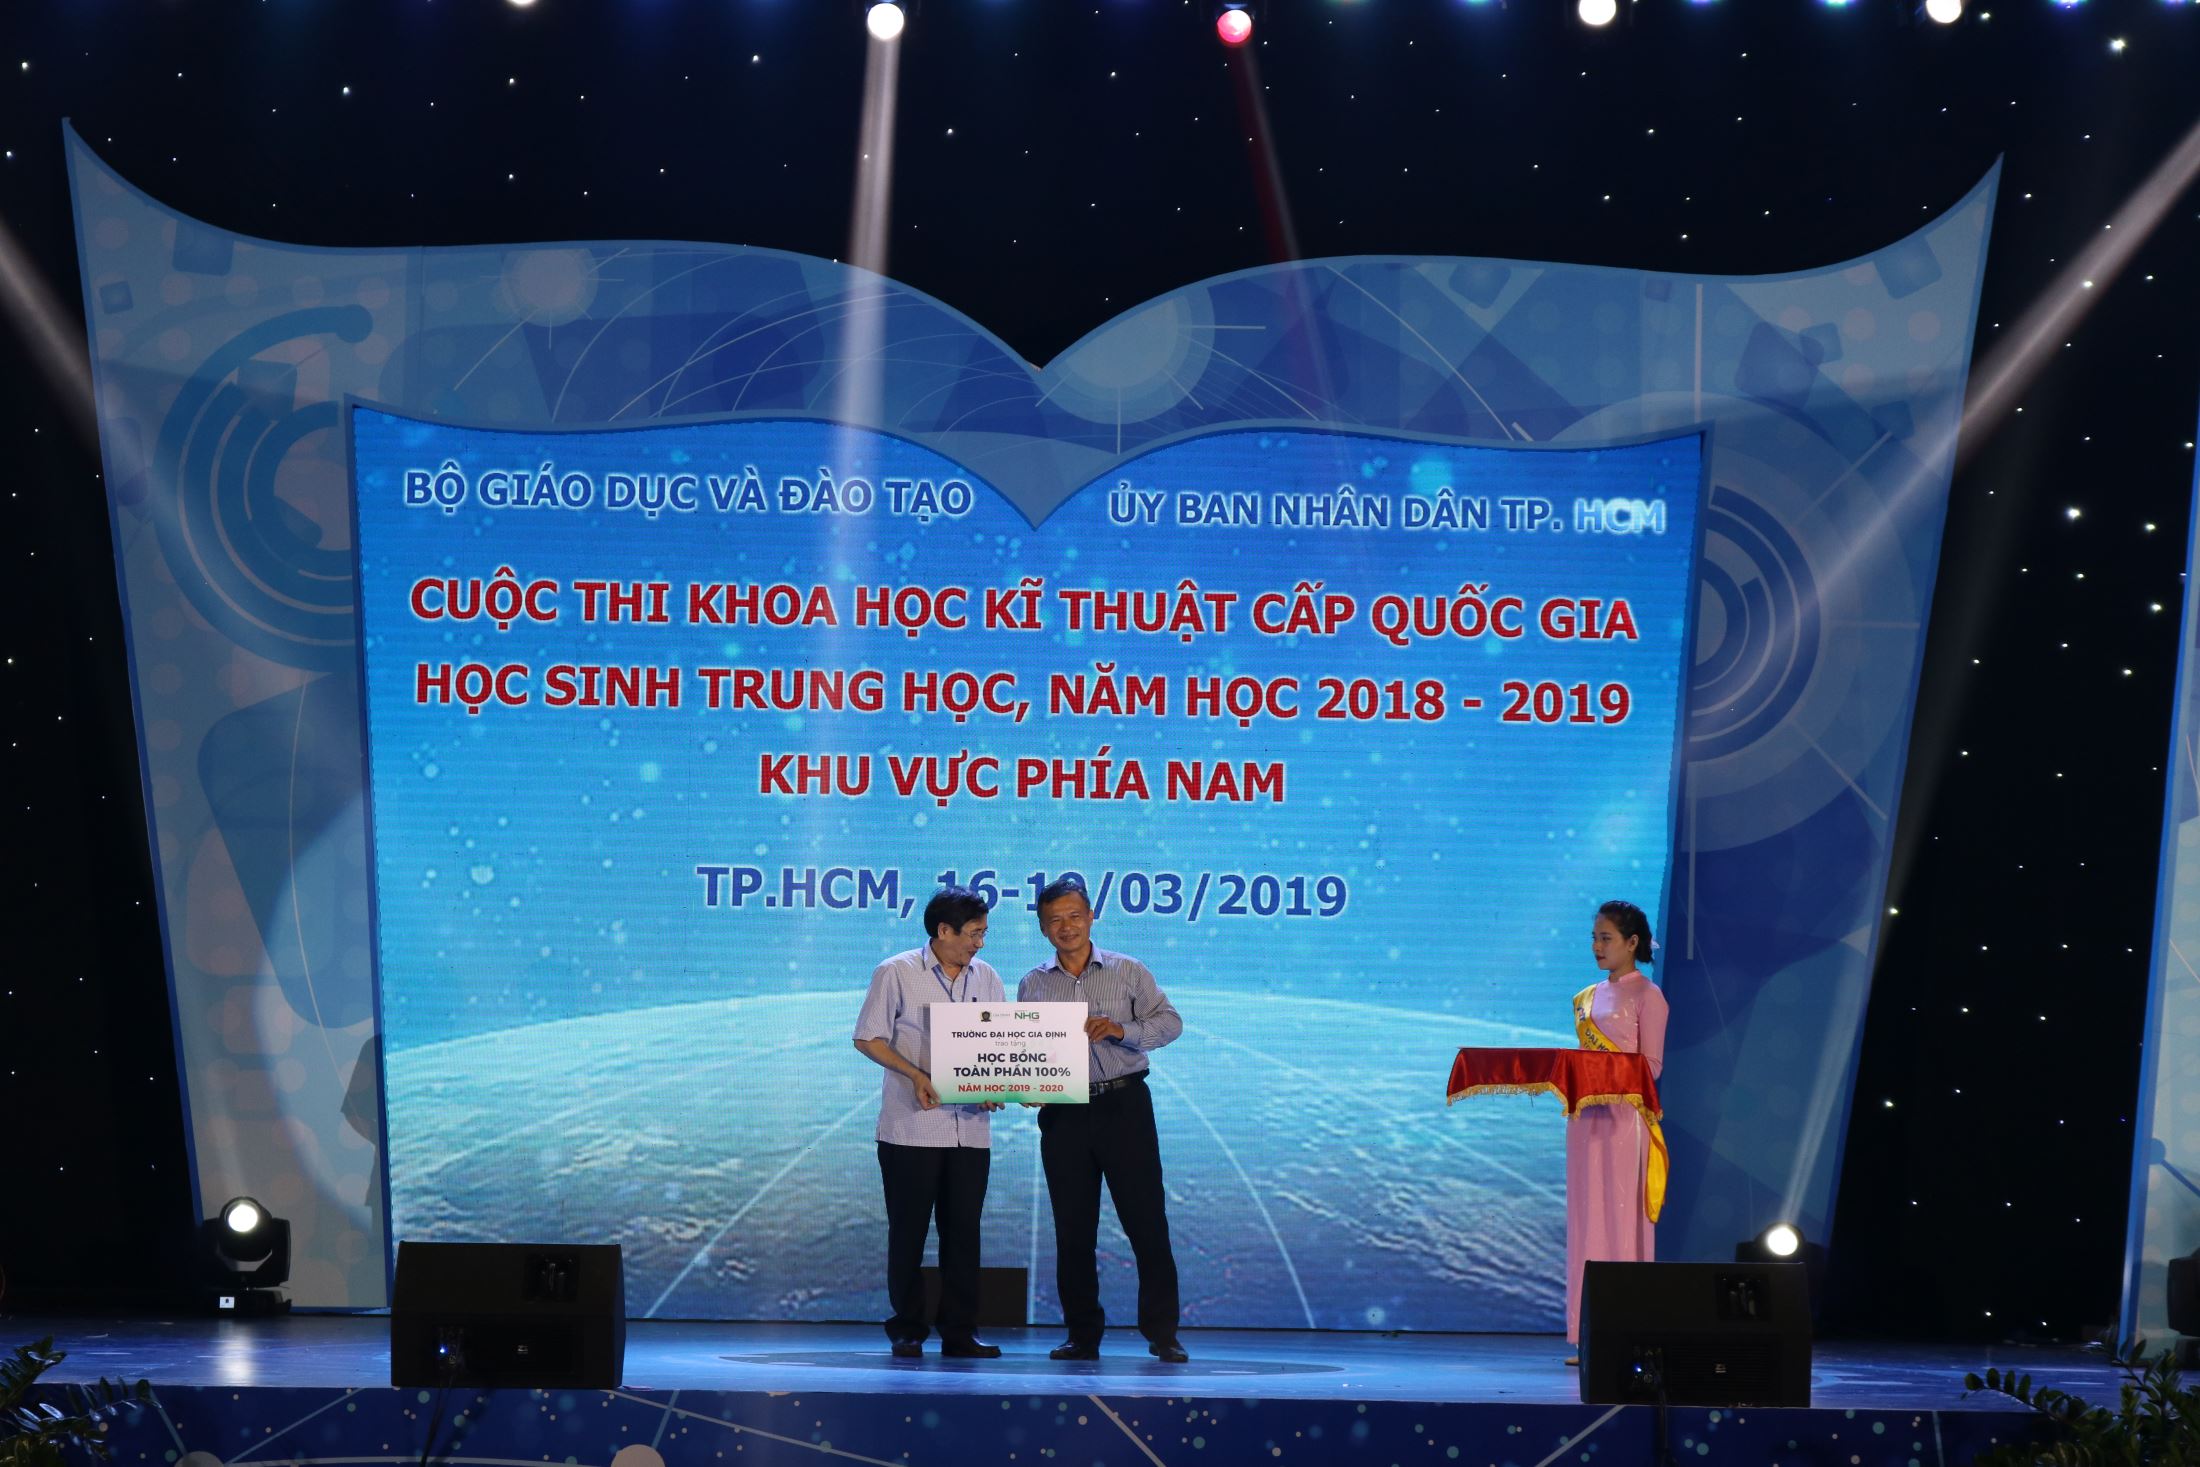 Dr. Le Manh Hai - Head of IT department of Gia Dinh University (GDU) awarding scholarships at the competition.